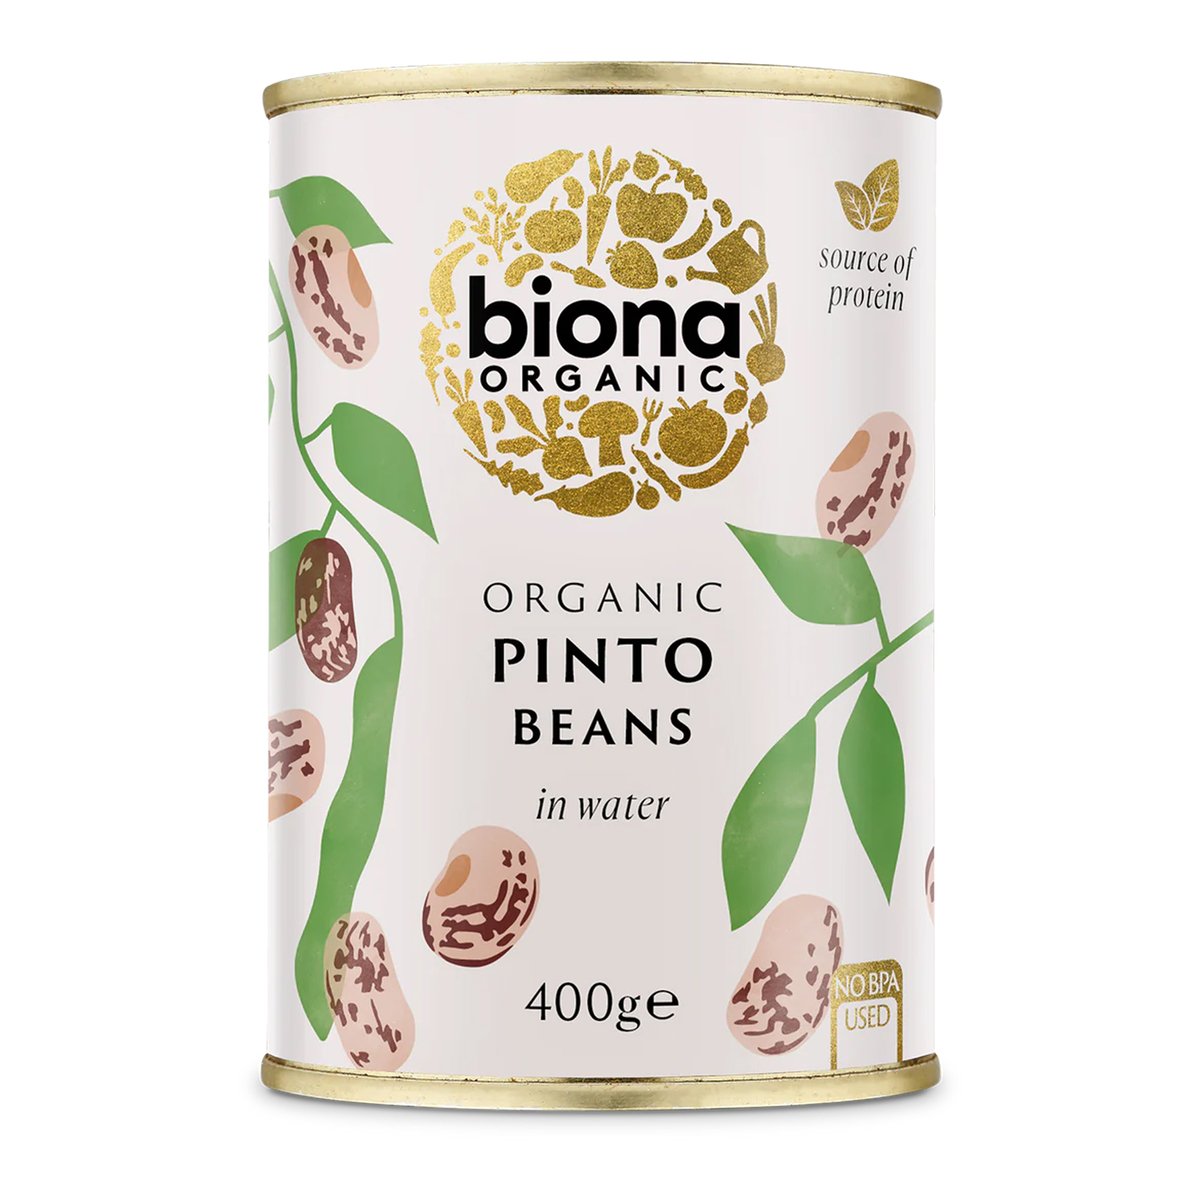 Biona Organic Pinto Beans in Water 400 g